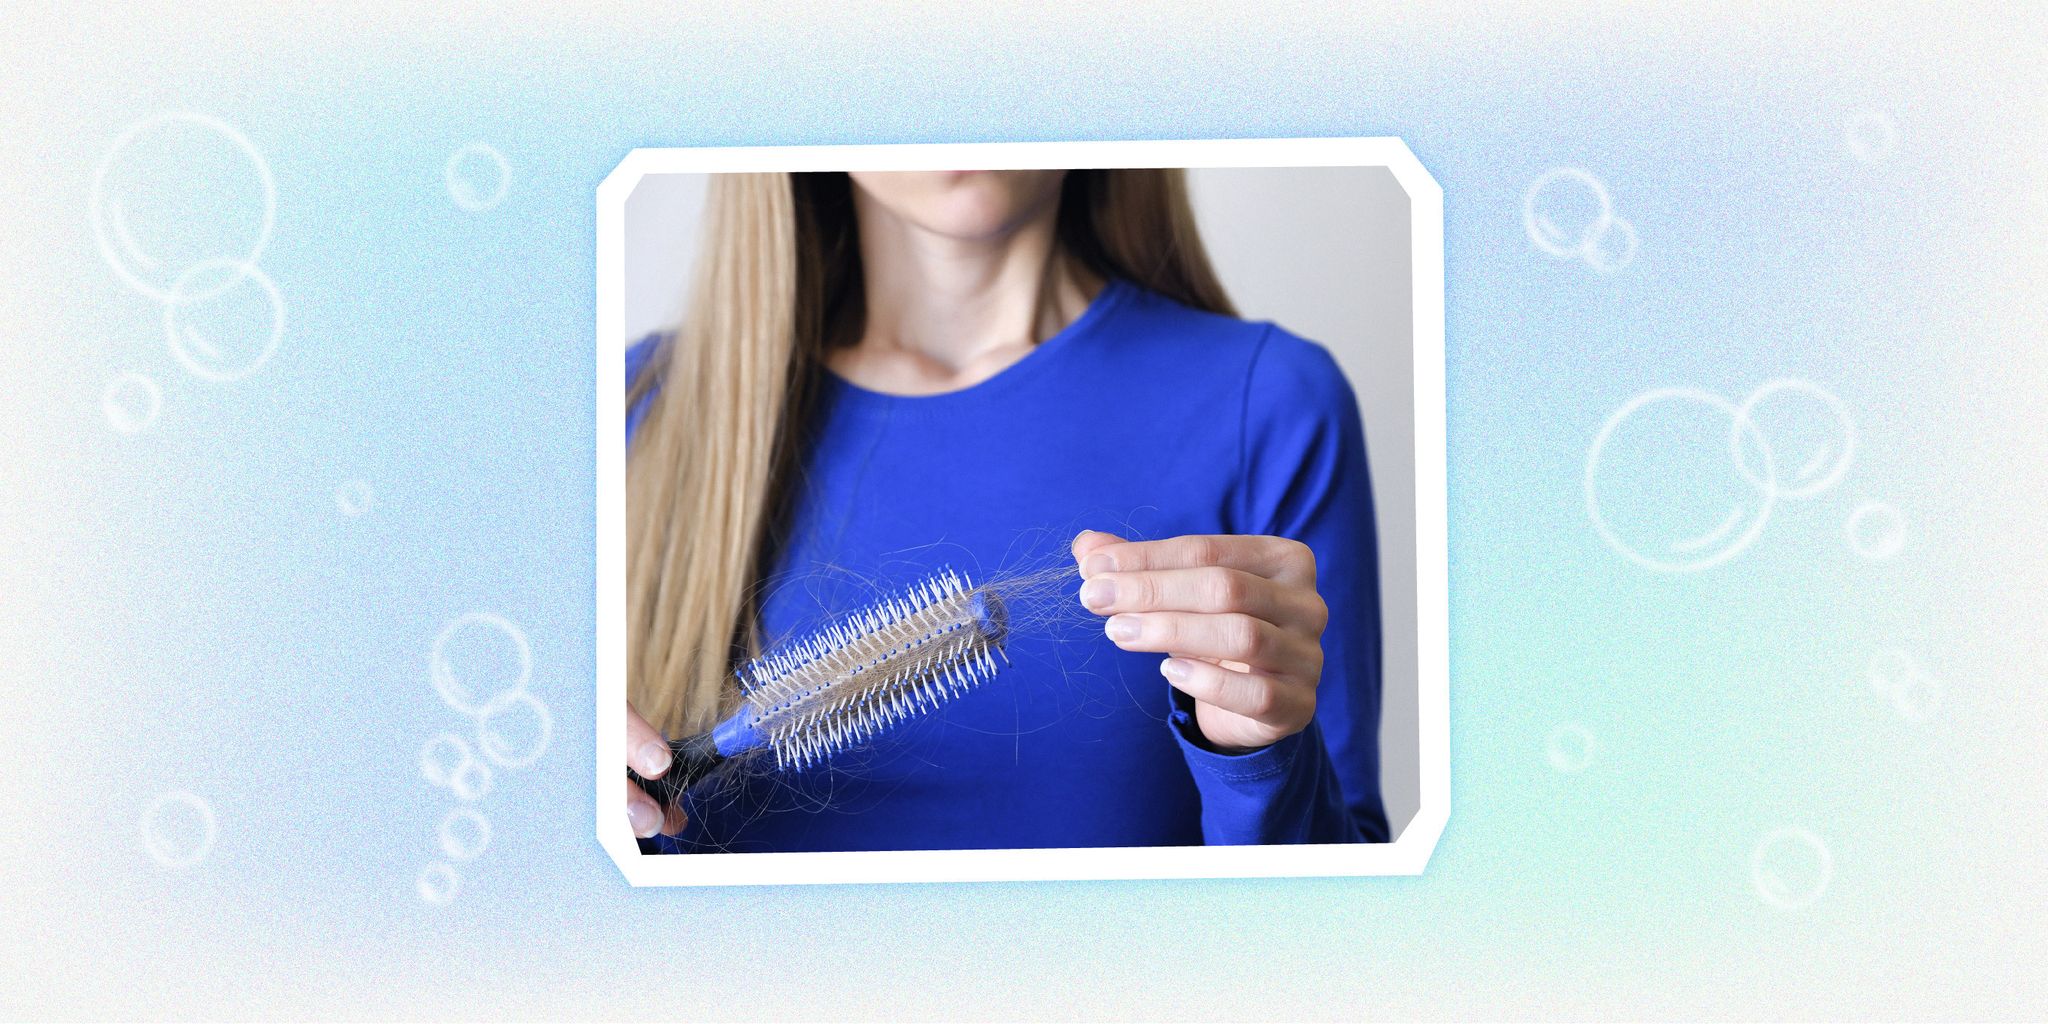 How to Clean Hair Brushes and Combs, According to Dermatologists